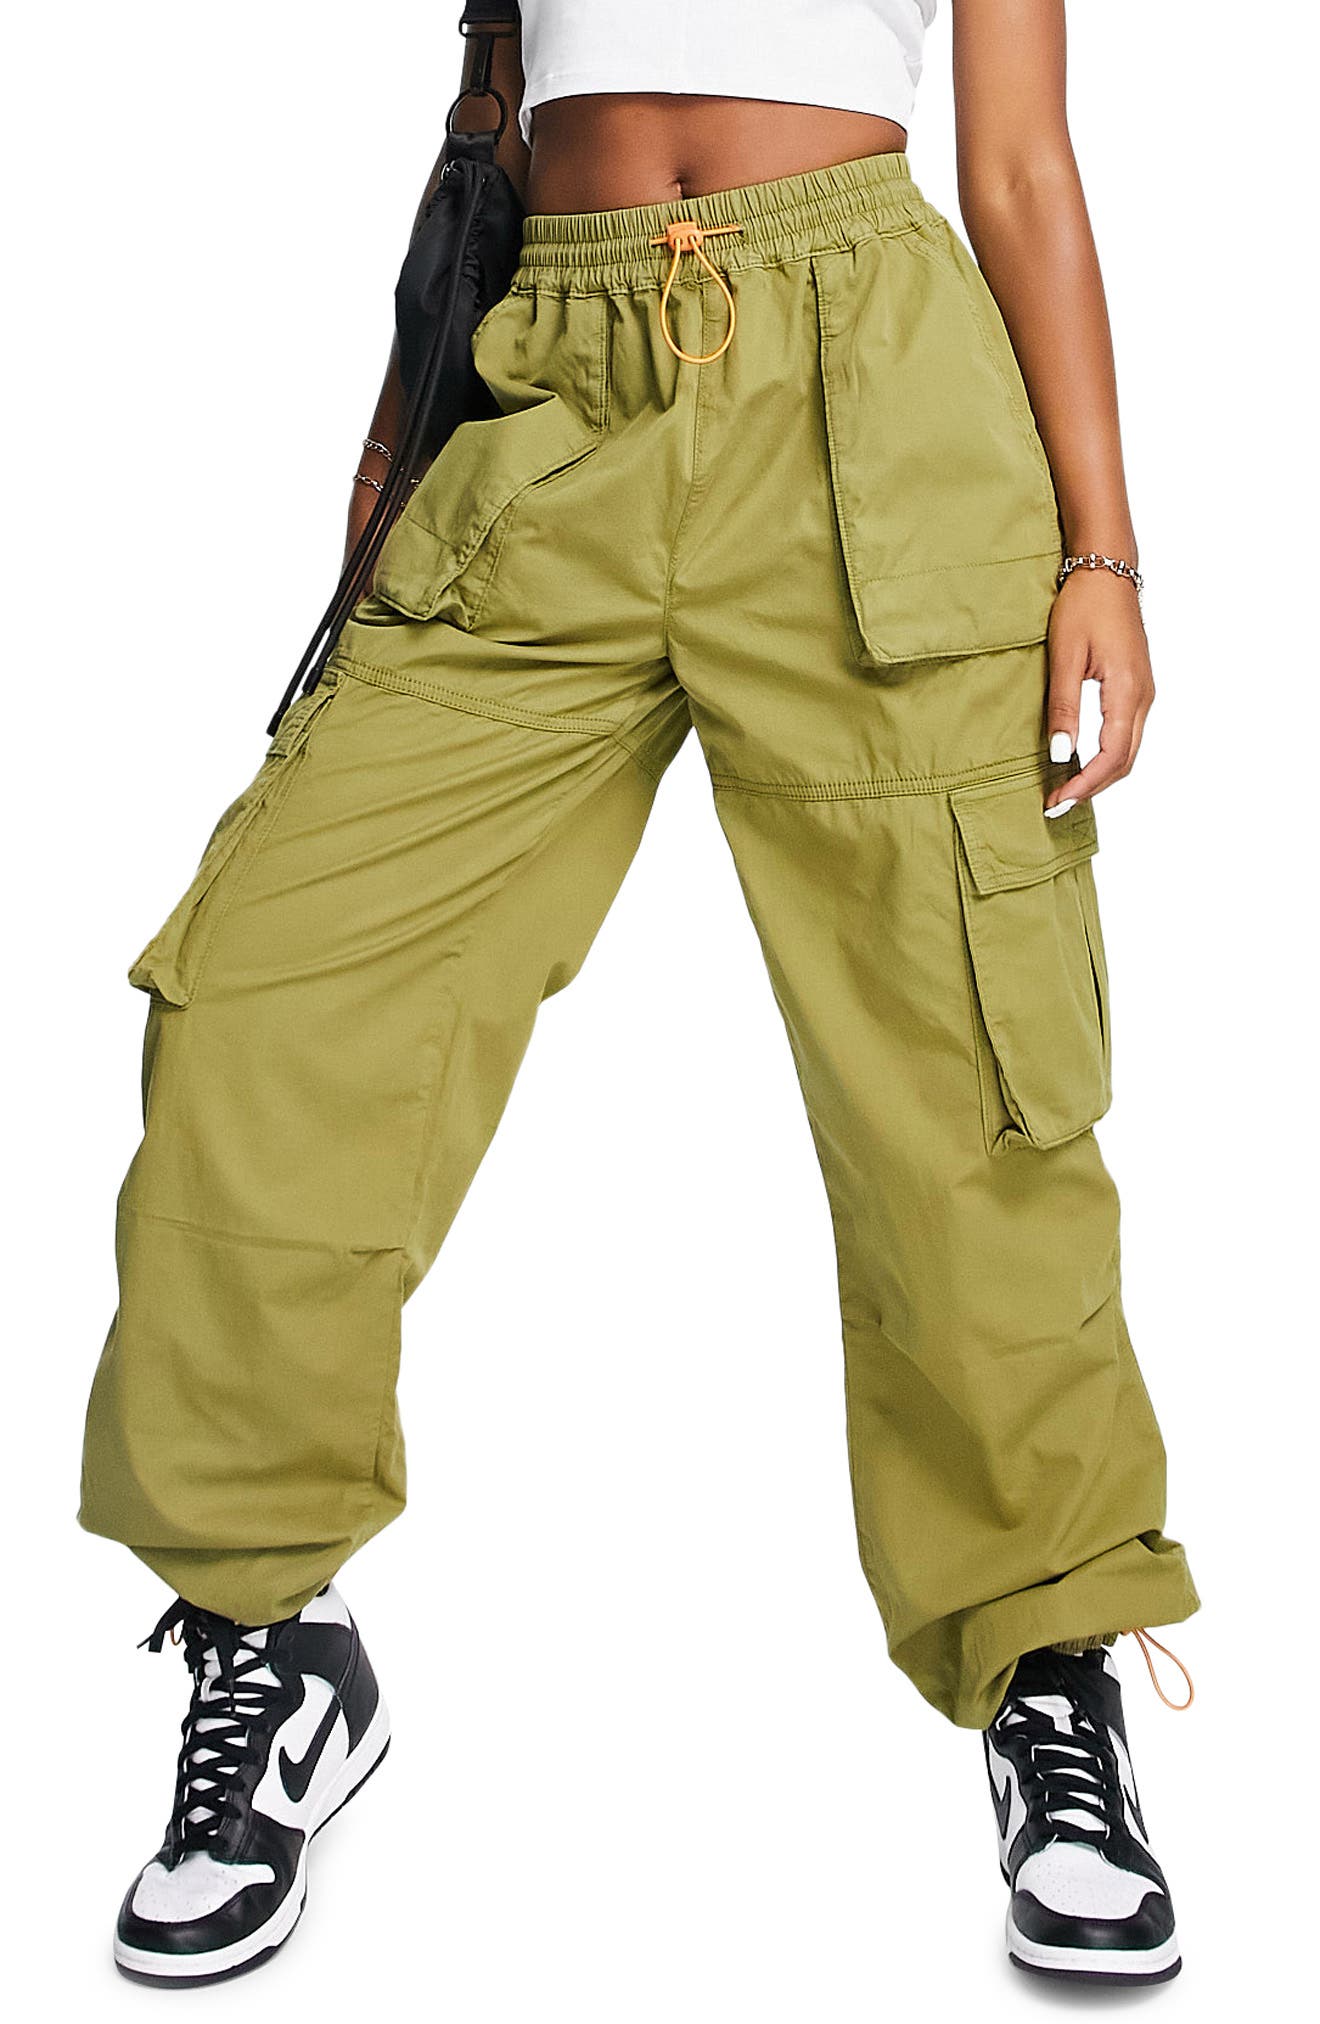 Clothing Gender-Neutral Adult Clothing Trousers 100 % Cotton  Black  Trousers Excellent Quality 3 Pockets Unisex Design. 